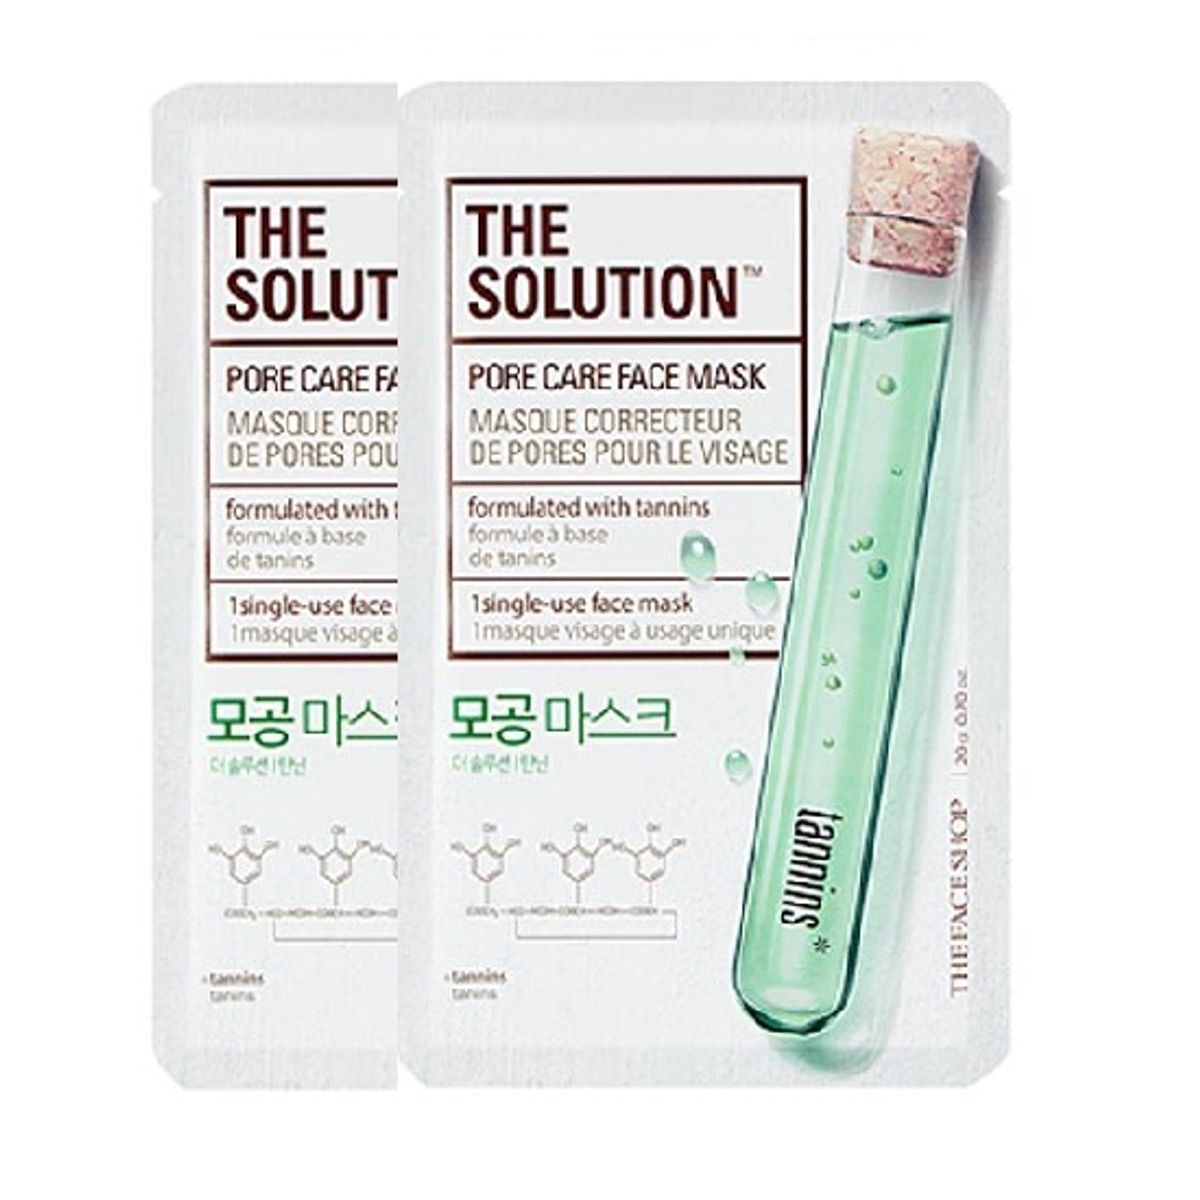 gift-mat-na-cham-soc-lo-chan-long-the-solution-pore-care-face-mask-2-sheets-1